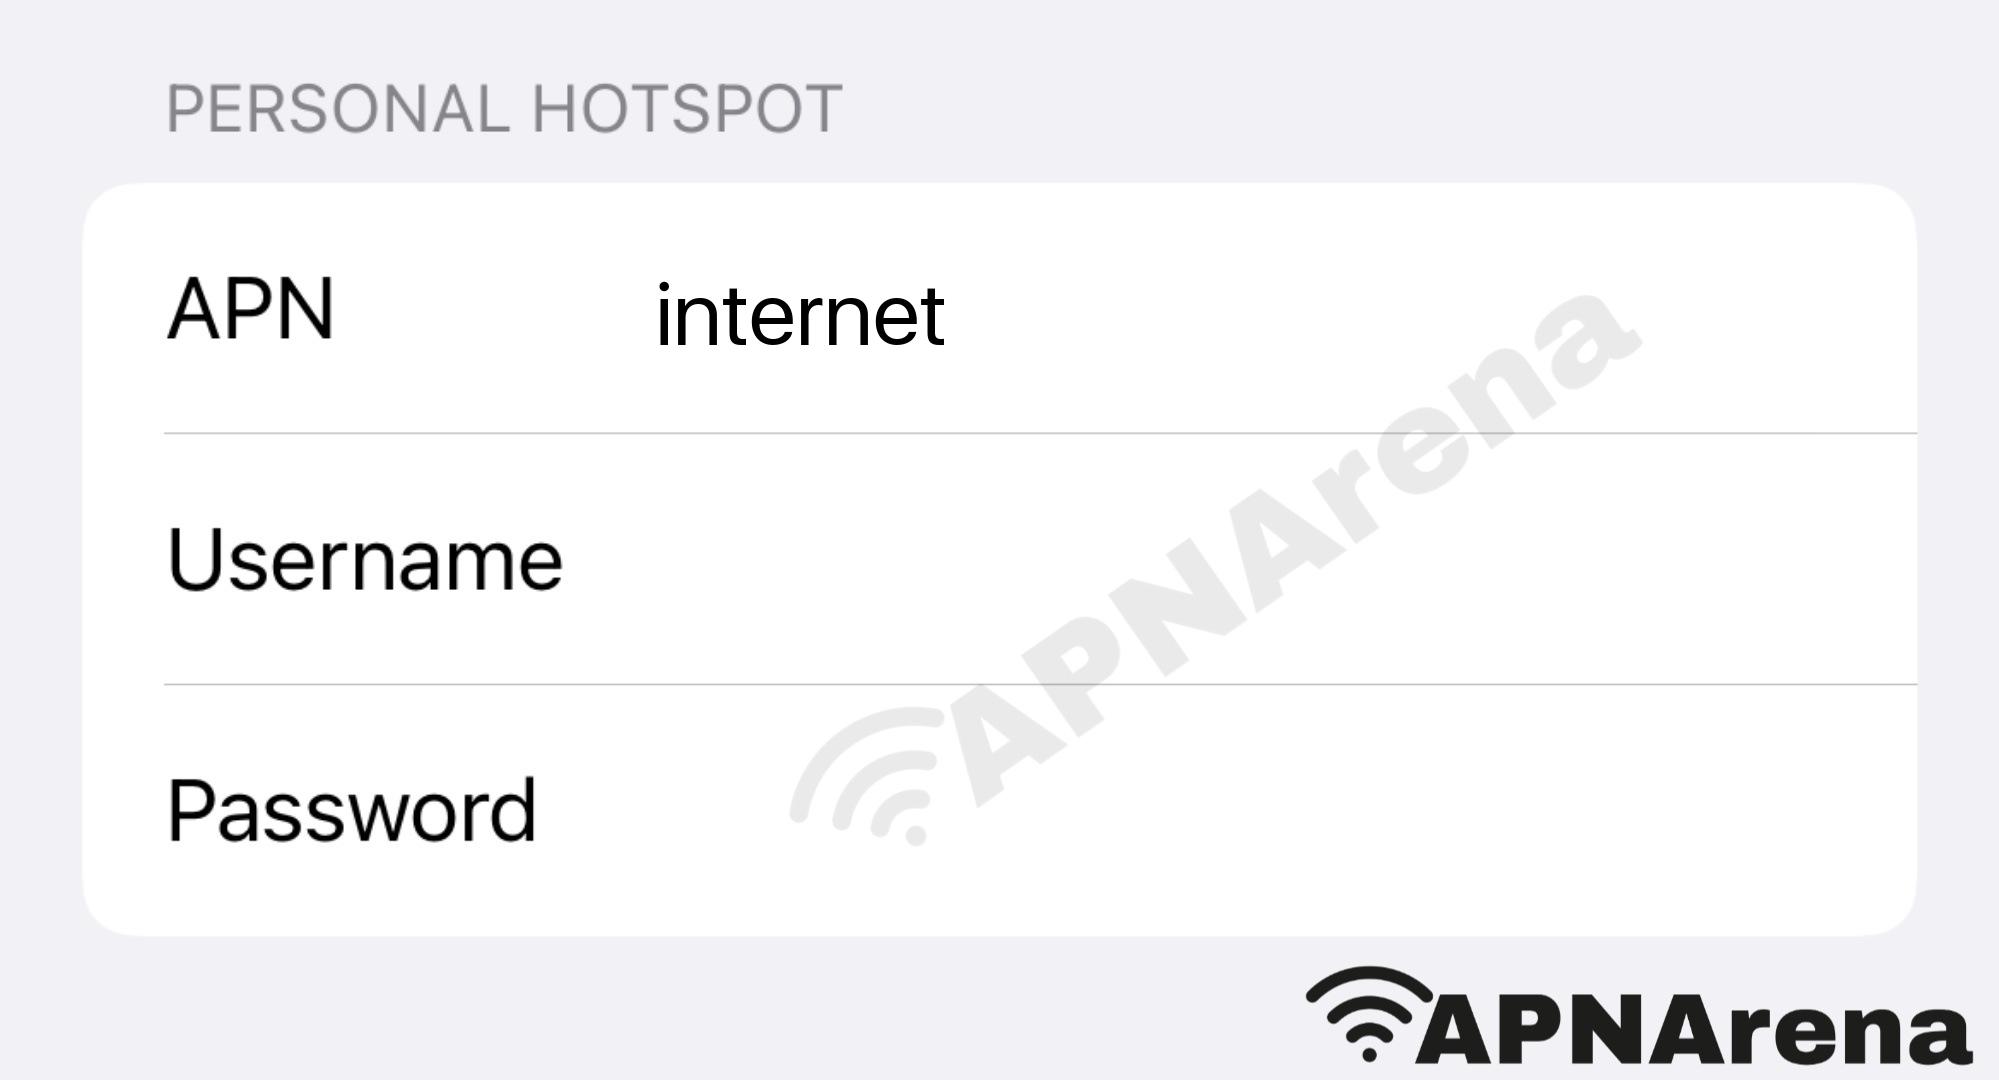 Exetel Personal Hotspot Settings for iPhone